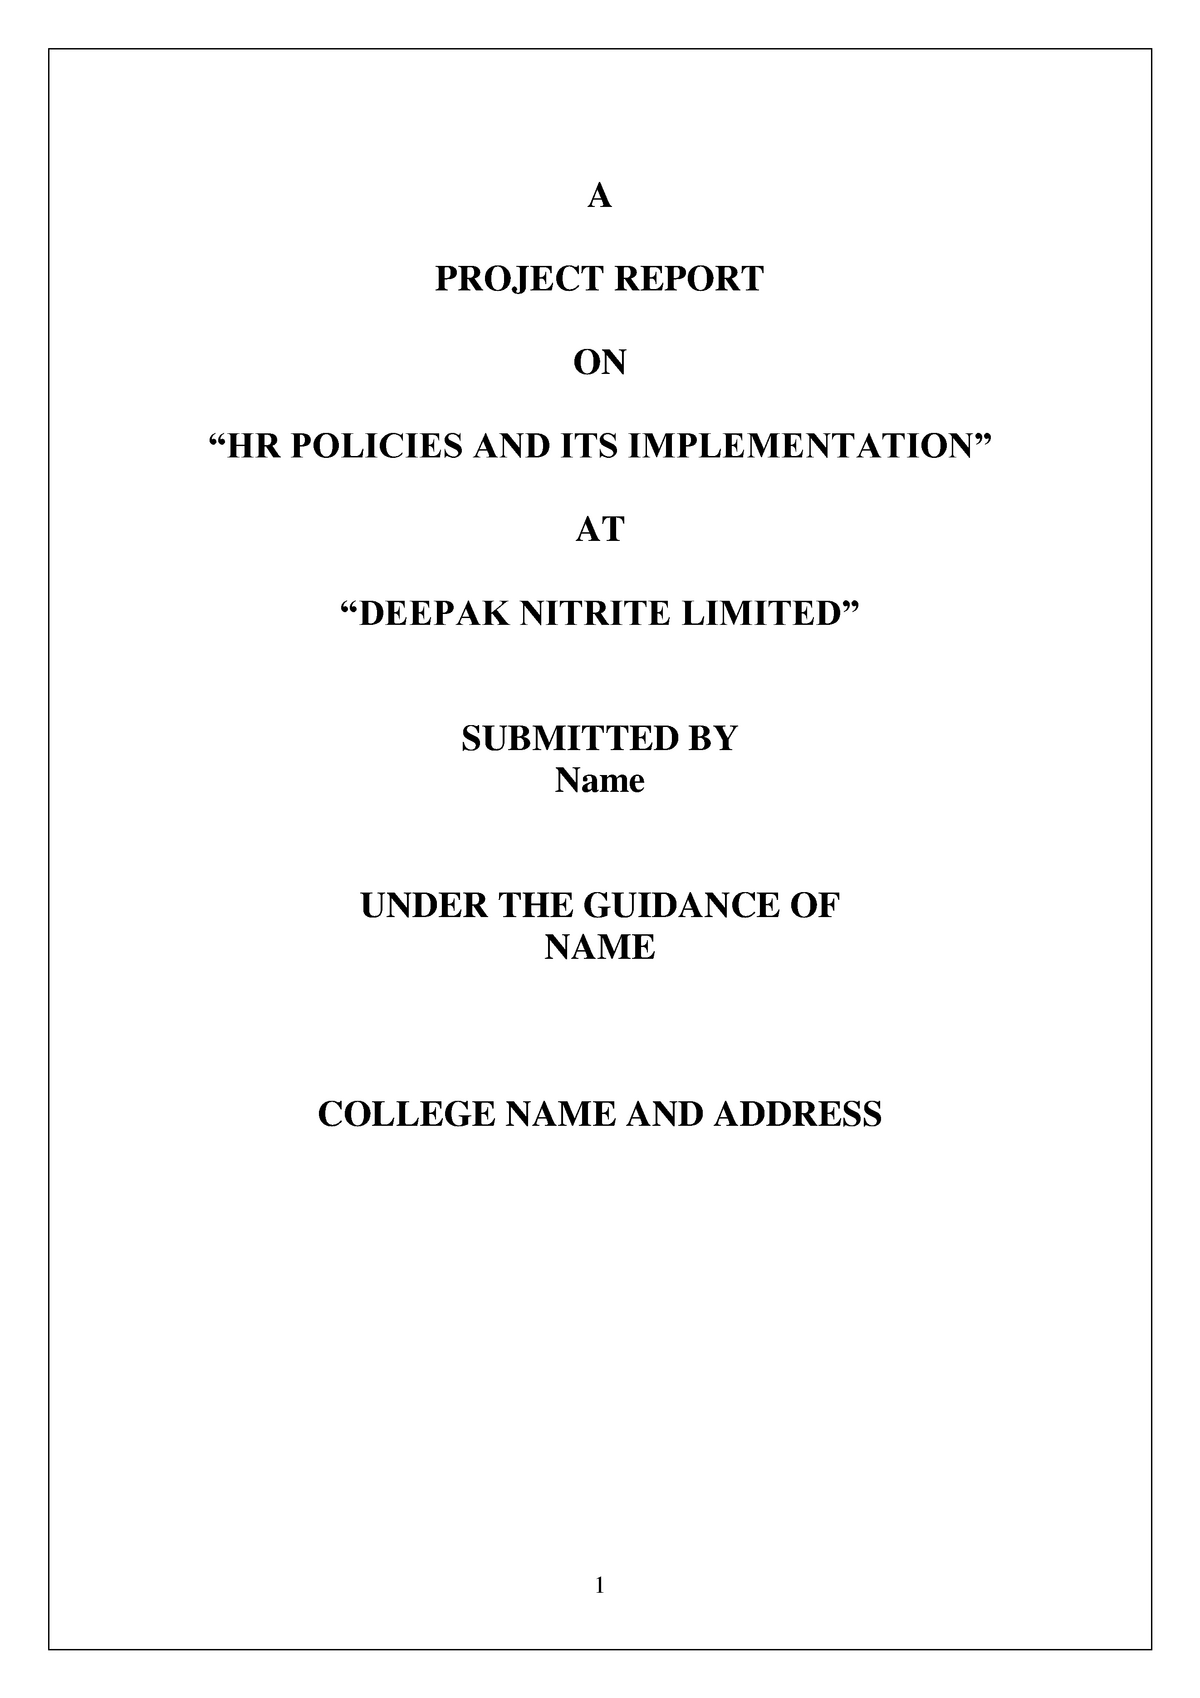 research project report mba aktu